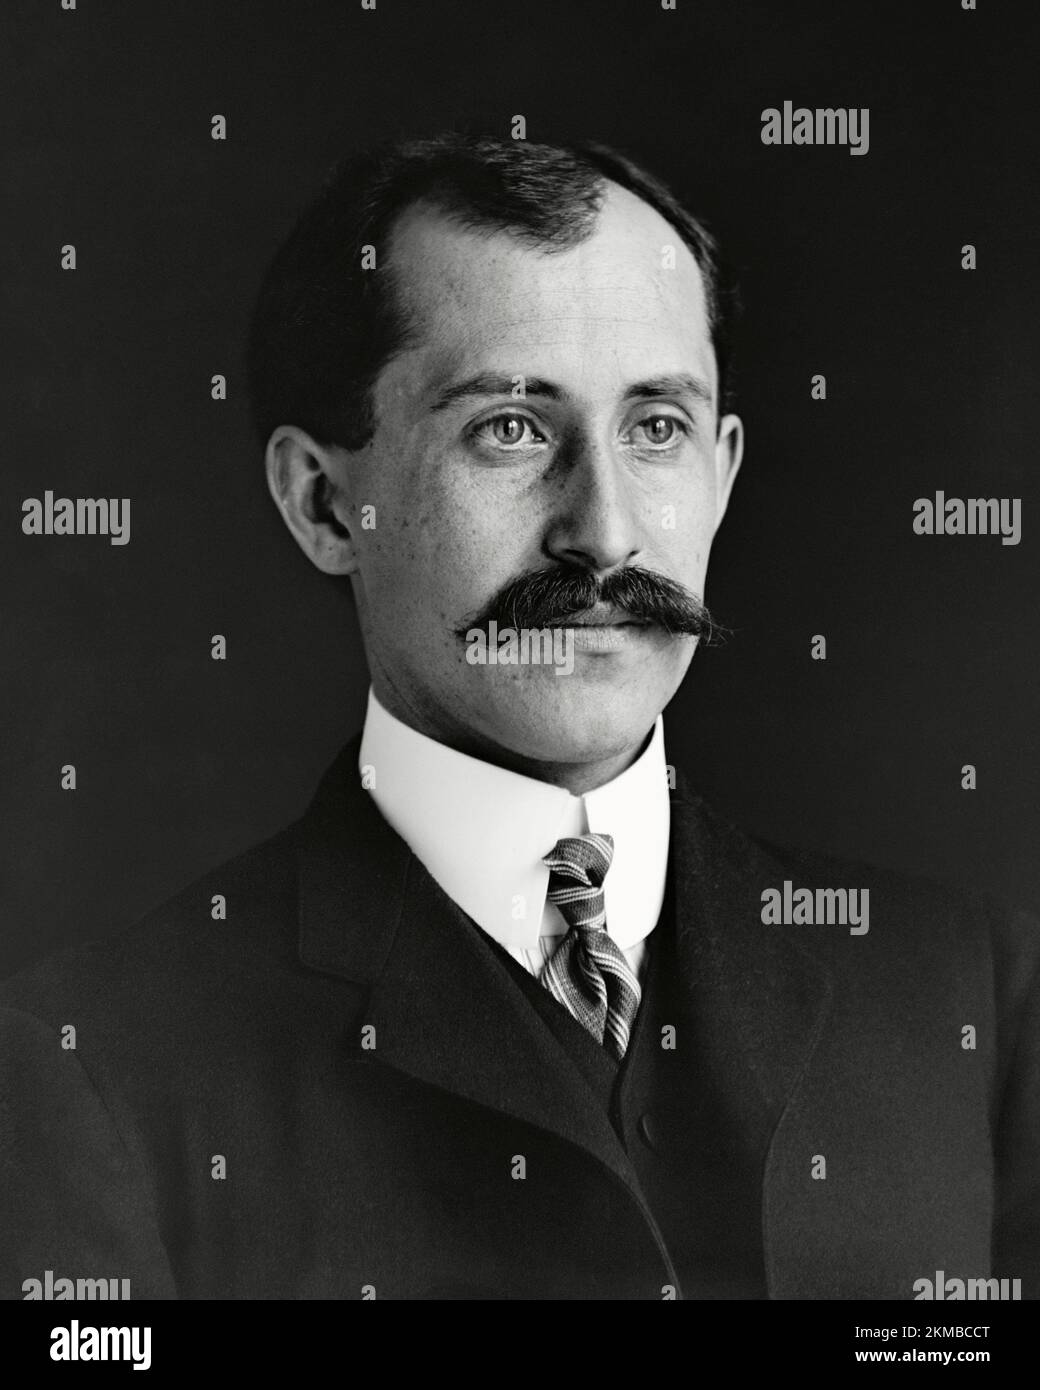 A portrait photograph of Orville Wright at Wright brothers, by Wilbur Wright. 1905. Stock Photo